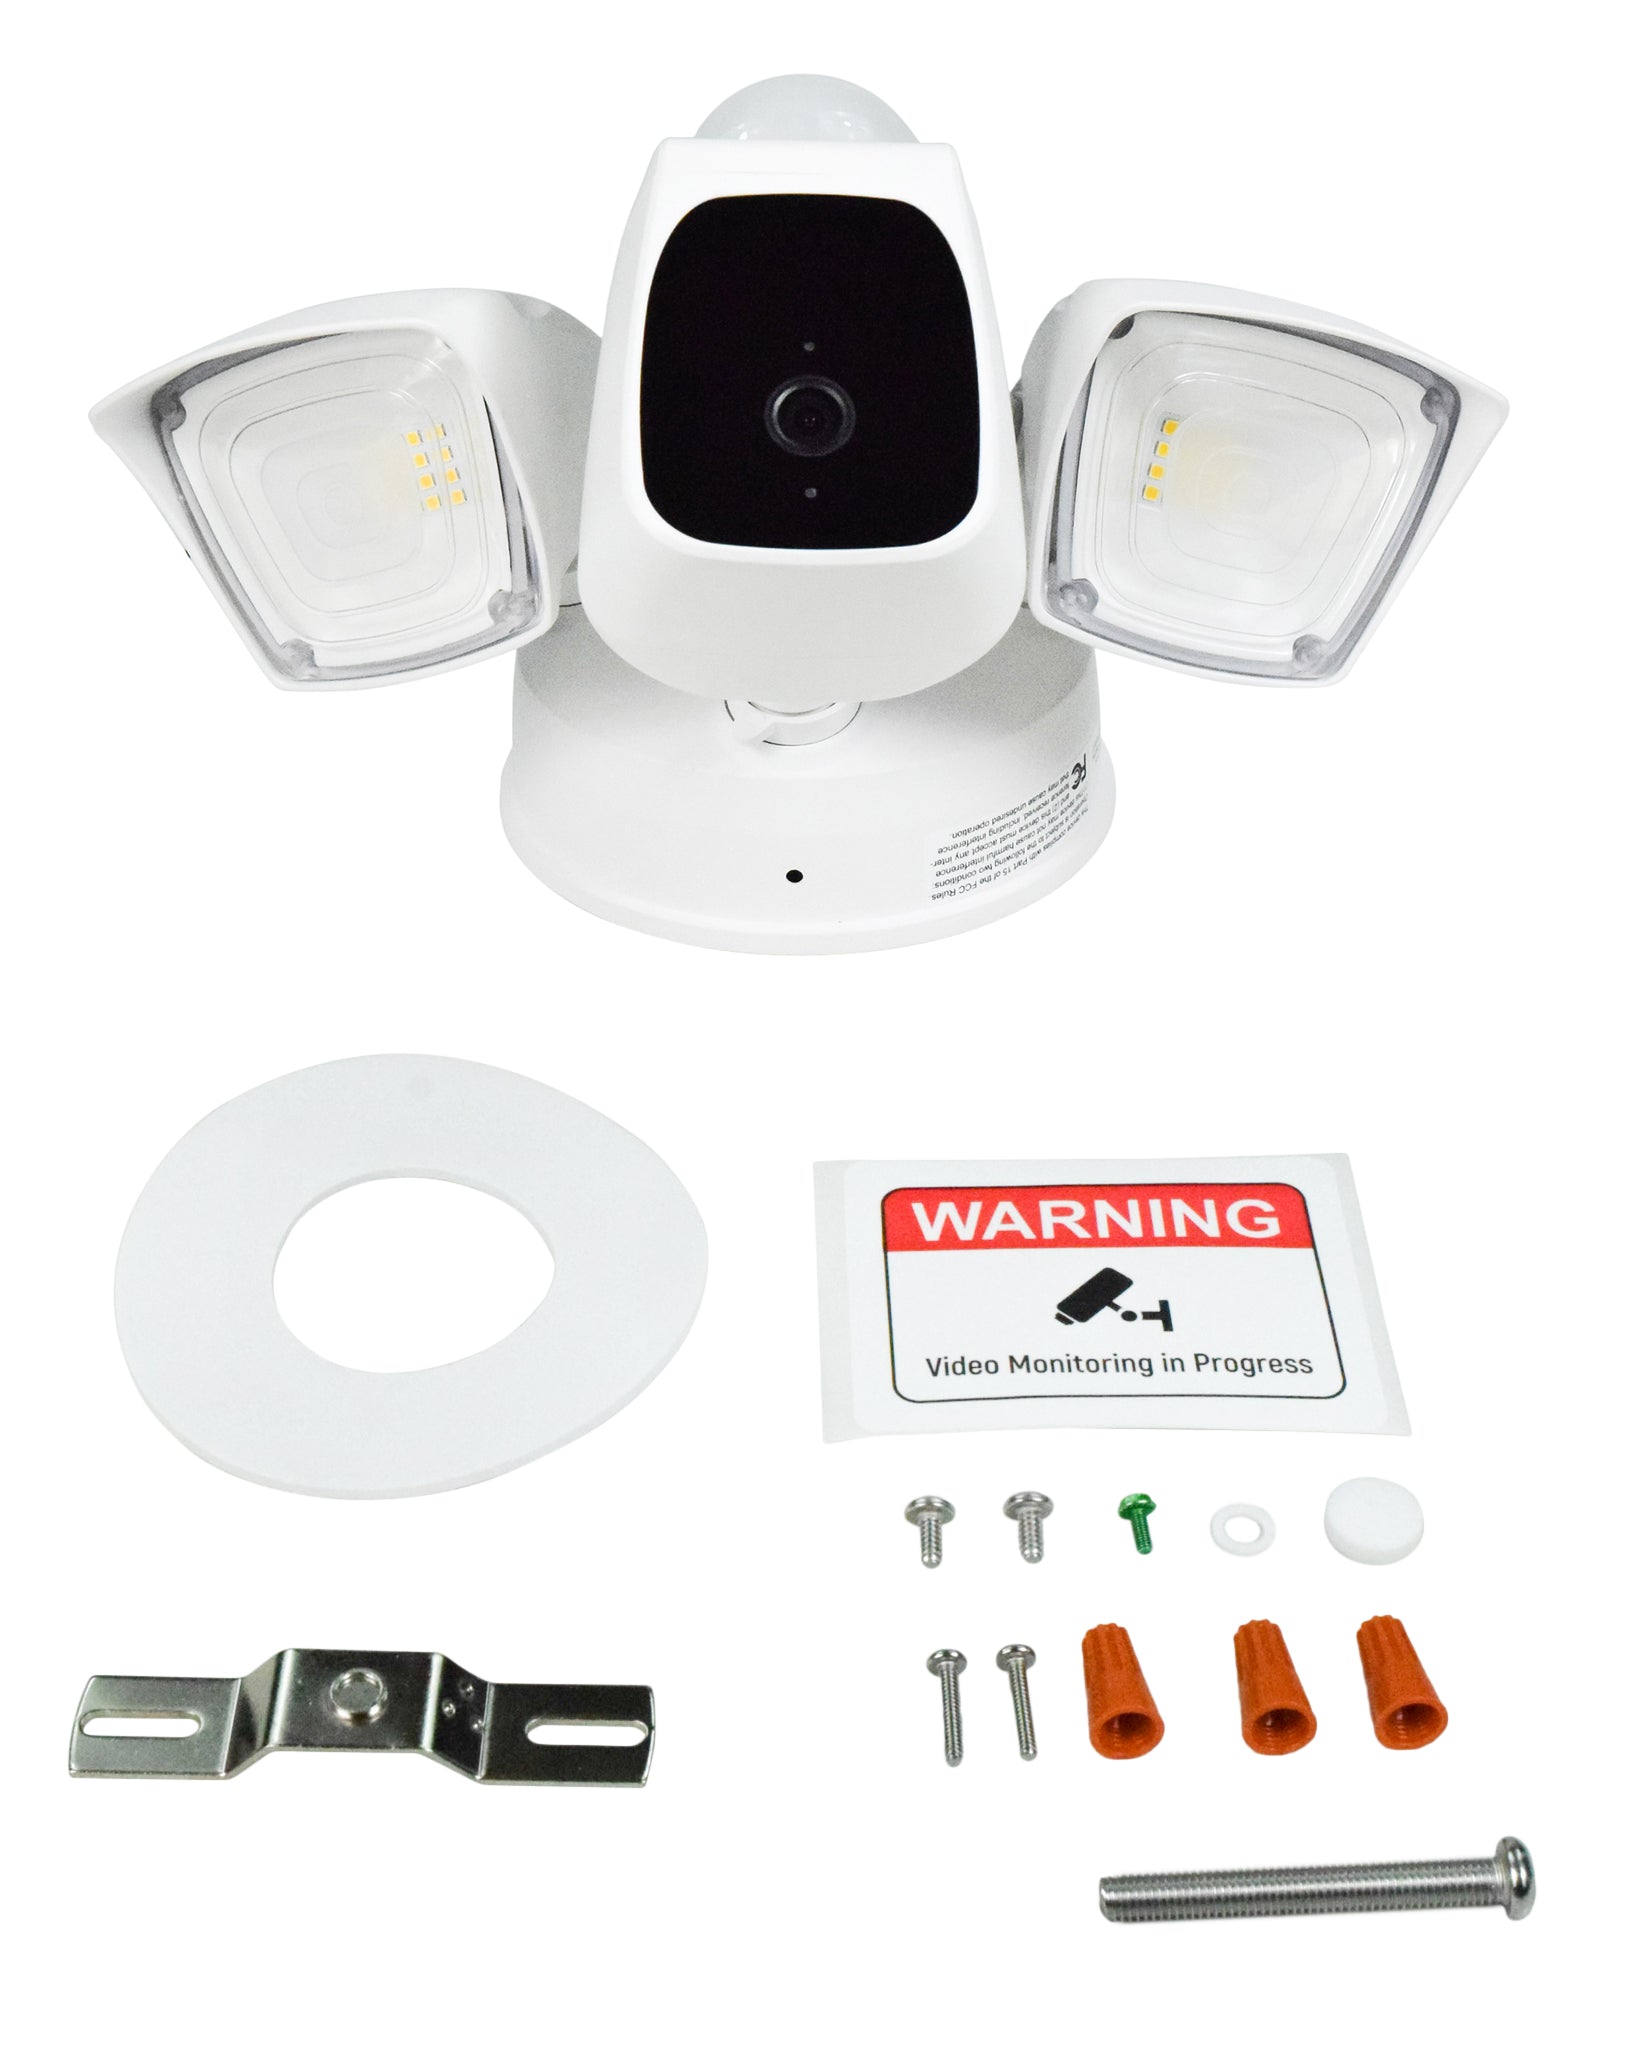 Home Zone Security Bright LED Security Flood Light With 1080p Wi-Fi Camera